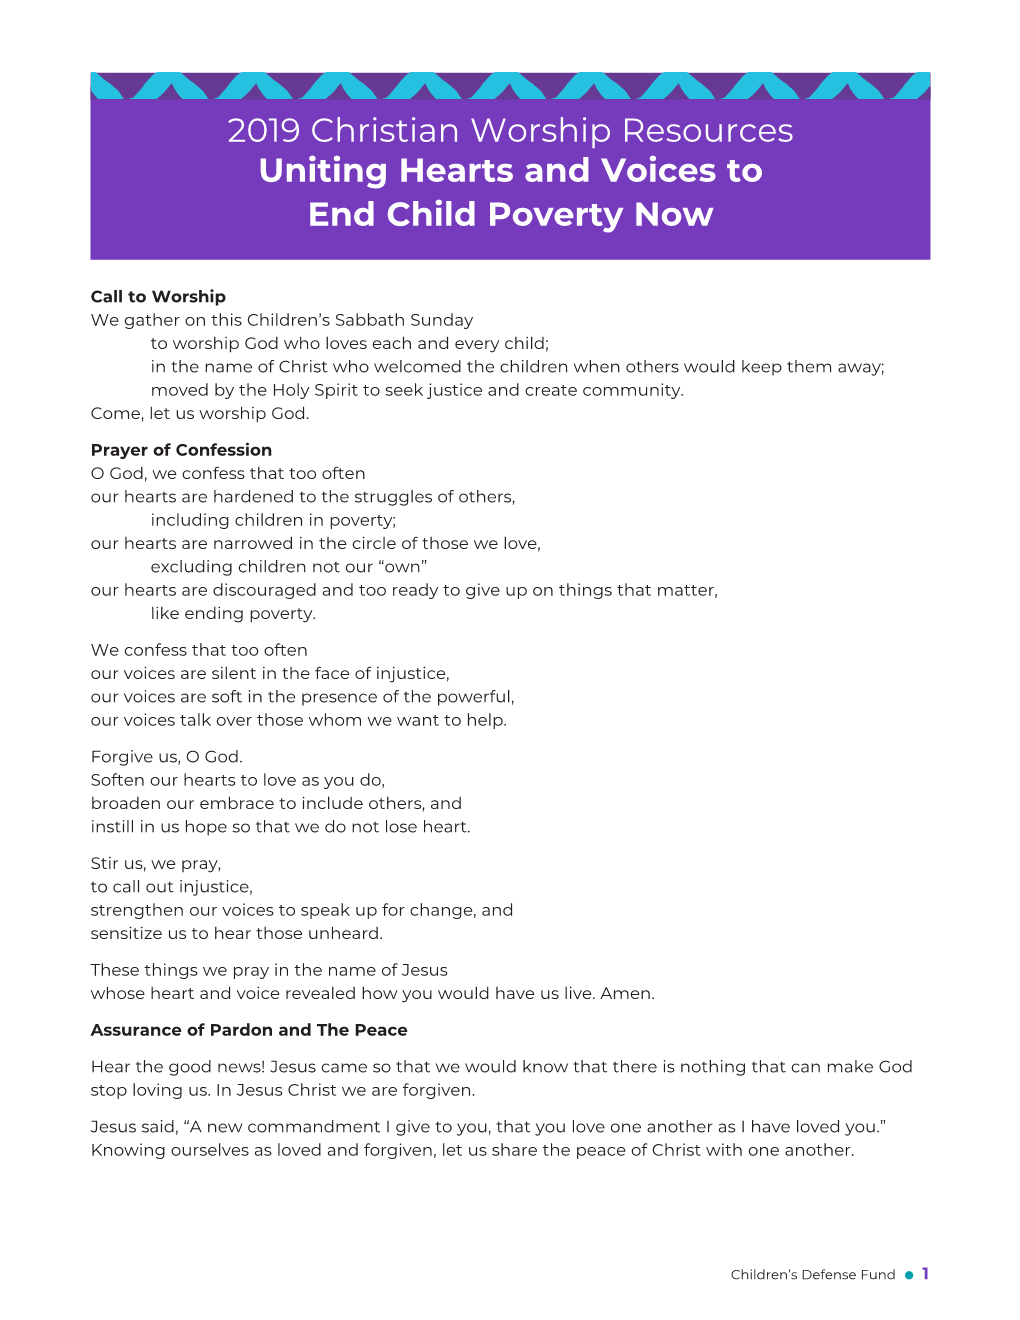 2019 Christian Worship Resources Uniting Hearts and Voices to End Child Poverty Now